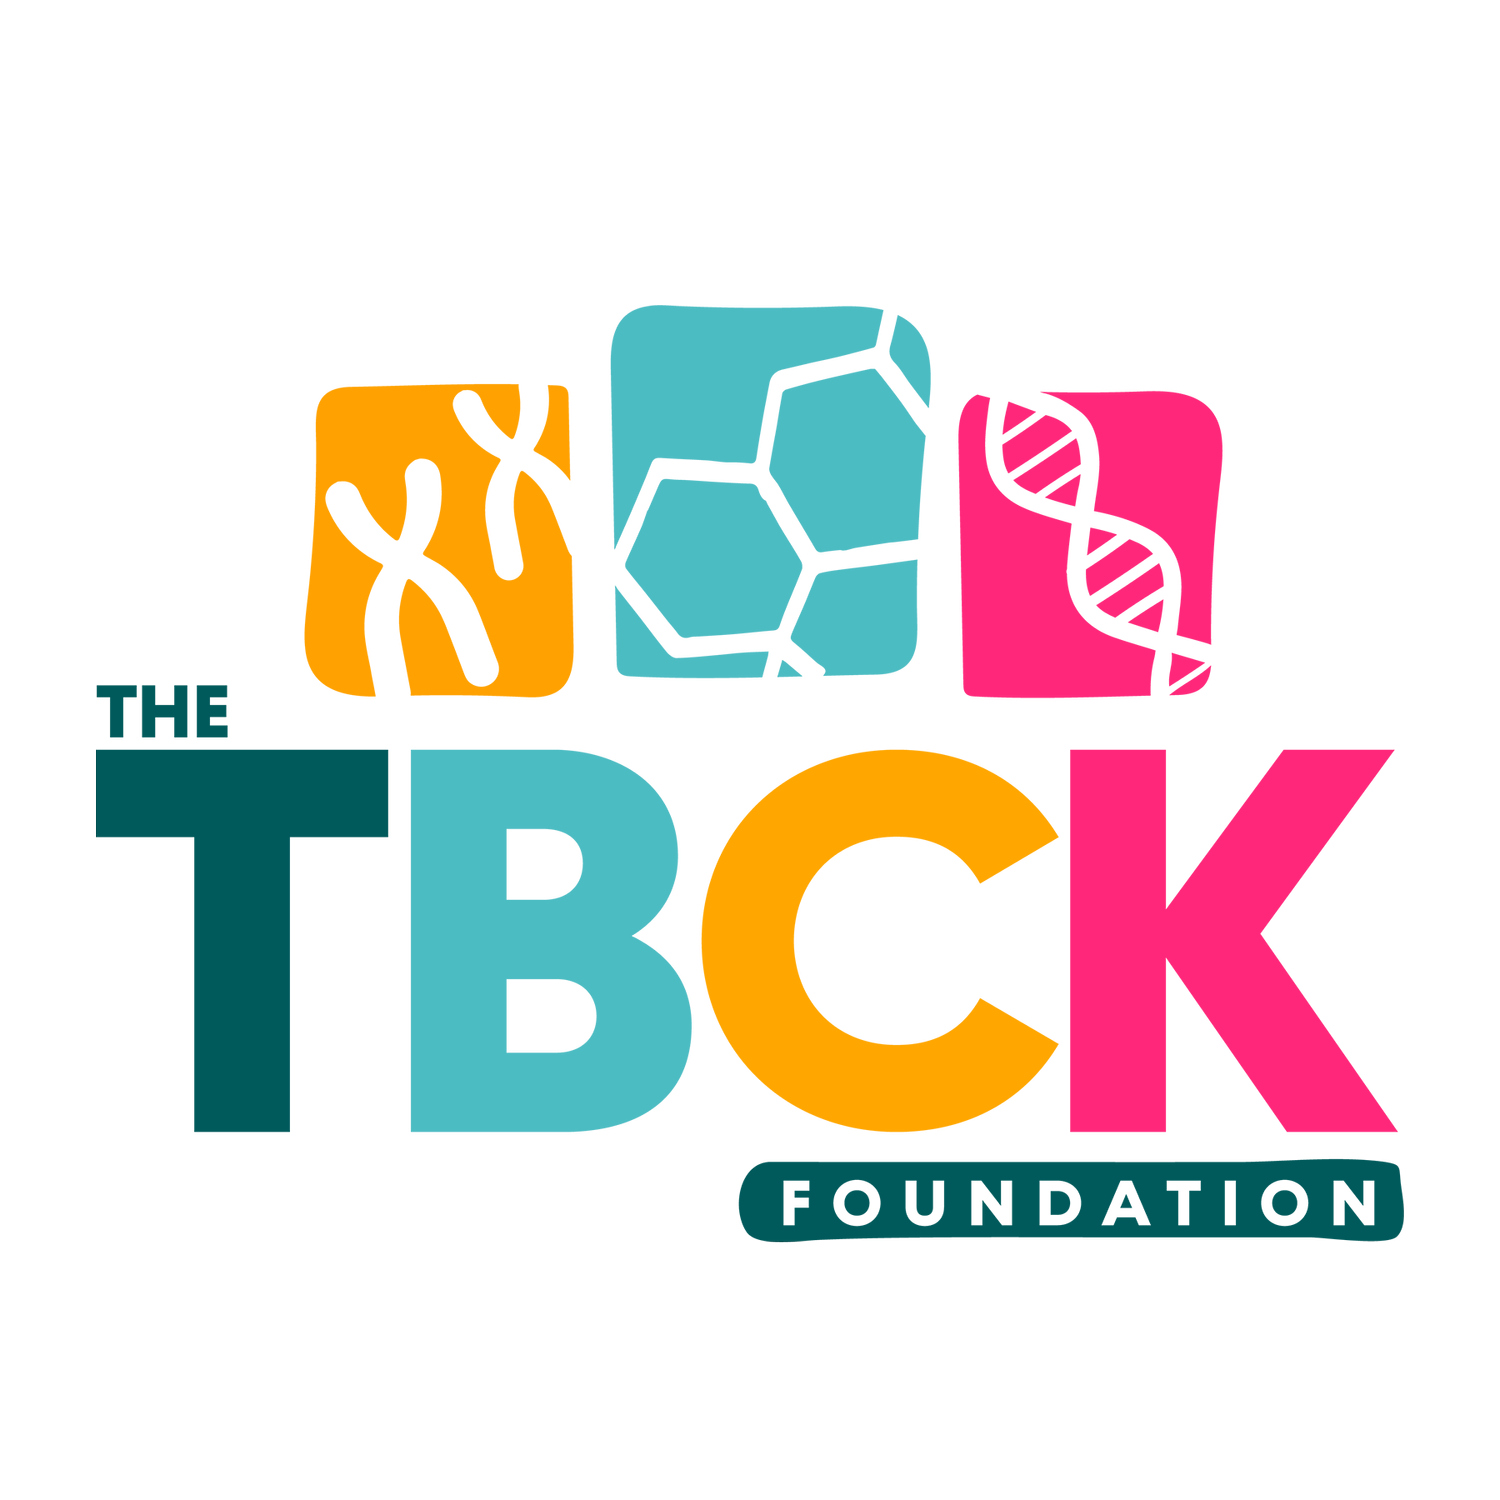 The TBCK Foundation